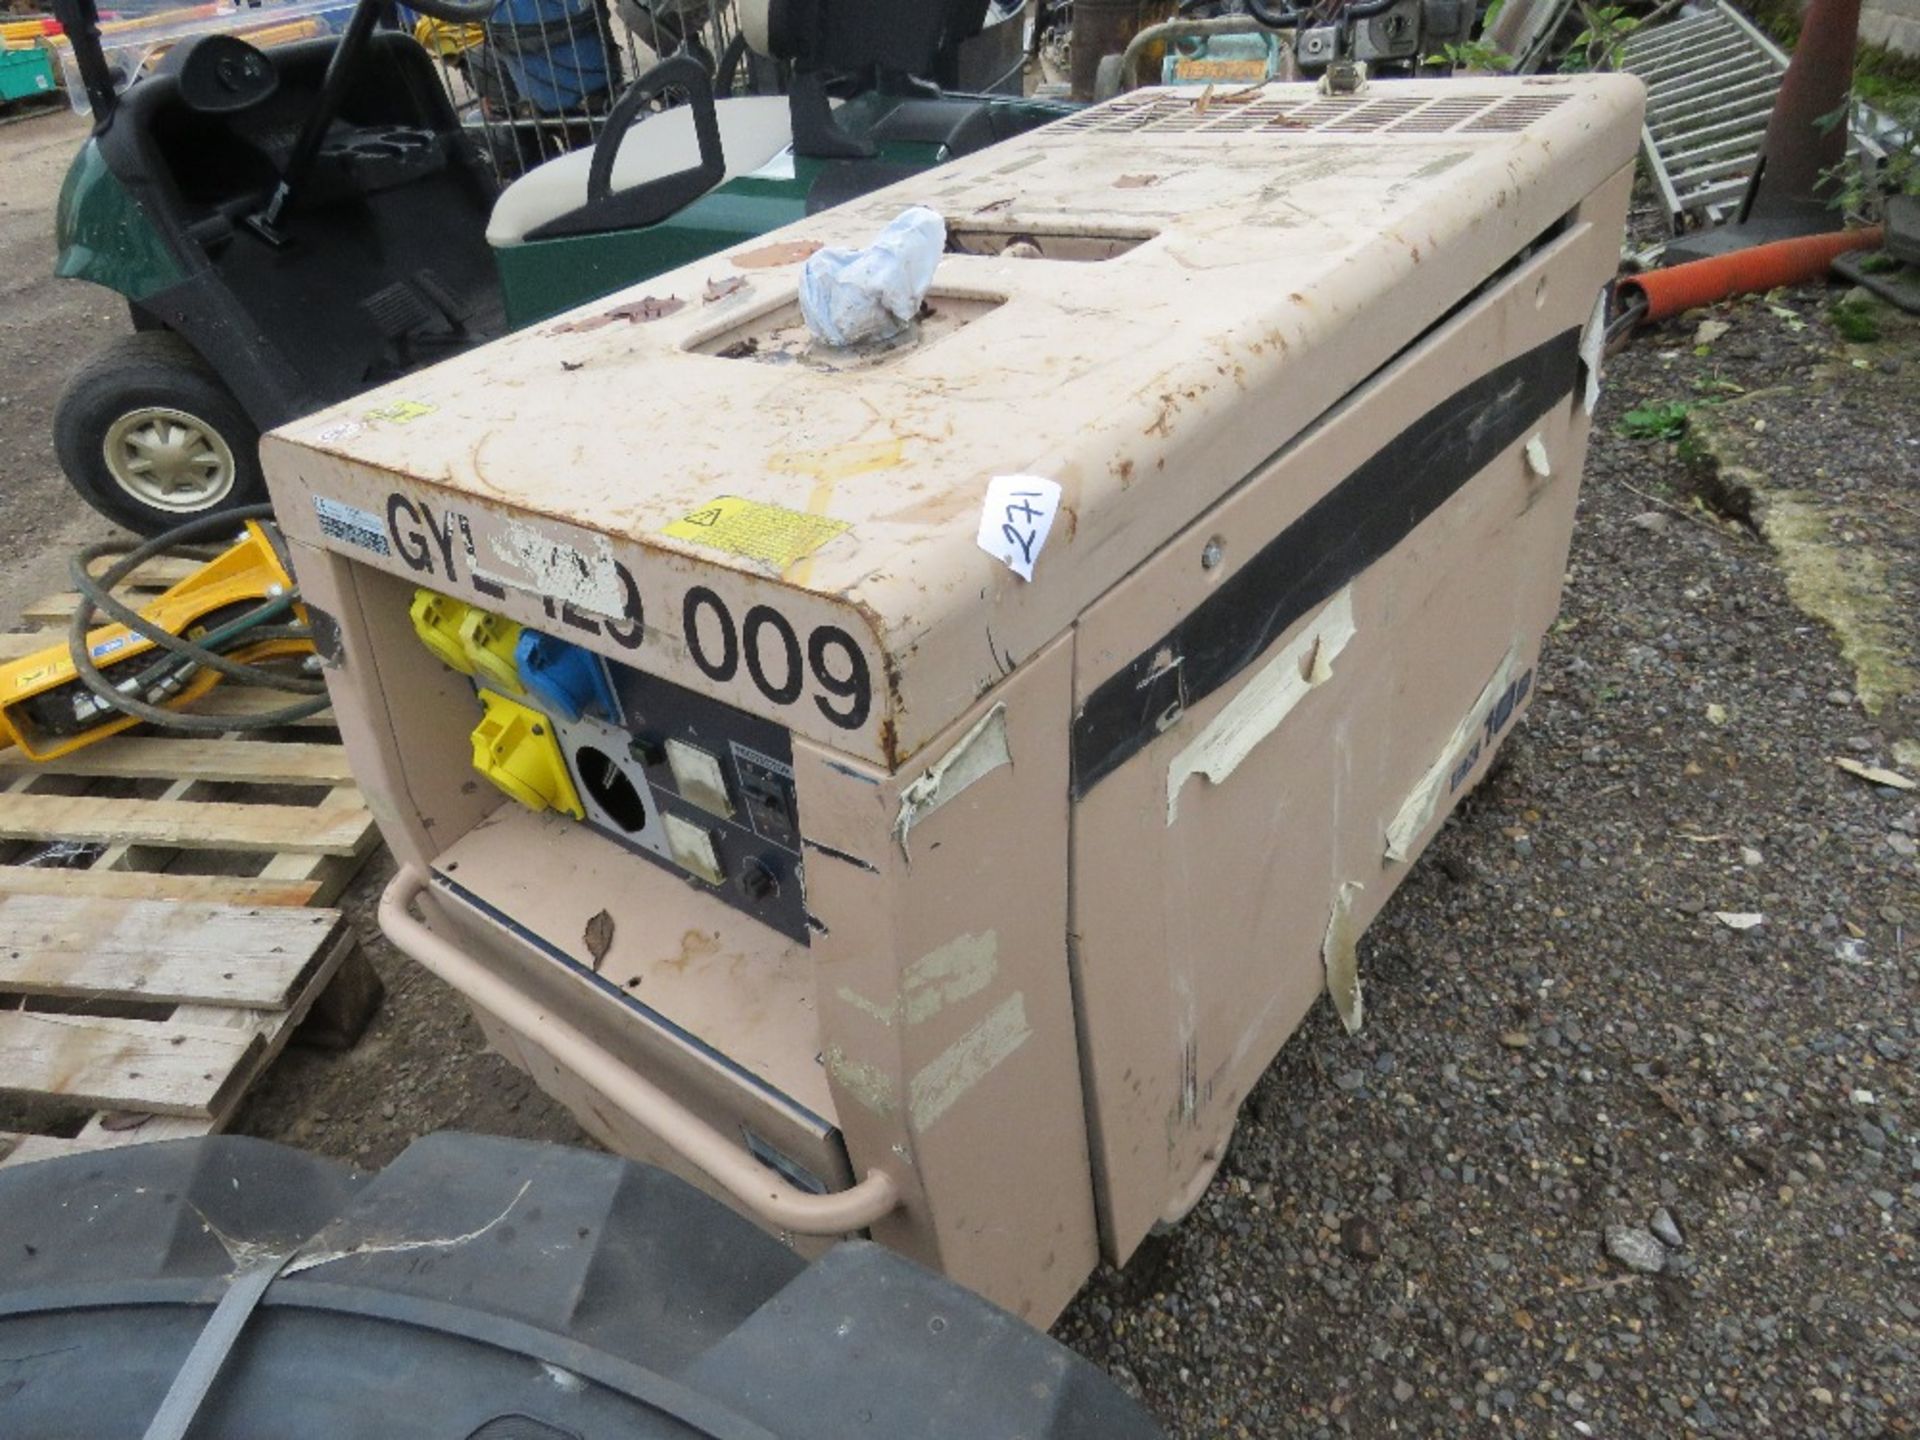 HONDA EX10D WHEELED 10KVA GENERATOR. SPARES/REPAIR AS APPEARS INCOMPLETE, SEE IMAGES.